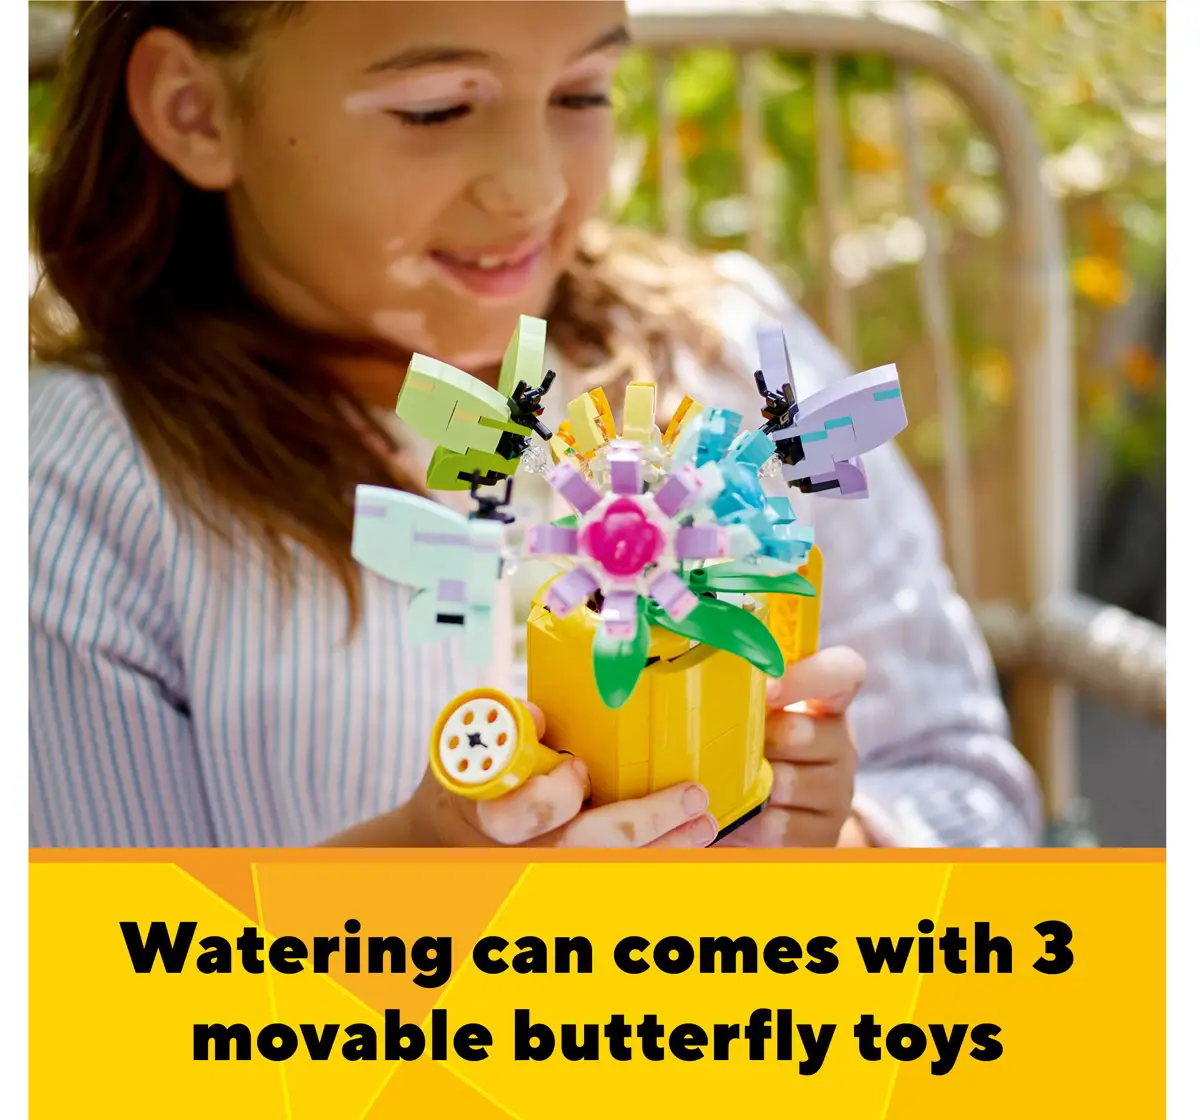 Lego Creator Flowers In Watering Can 3 In 1 Toy 31149 Multicolour For Kids Ages 8Y+ (420 Pieces)